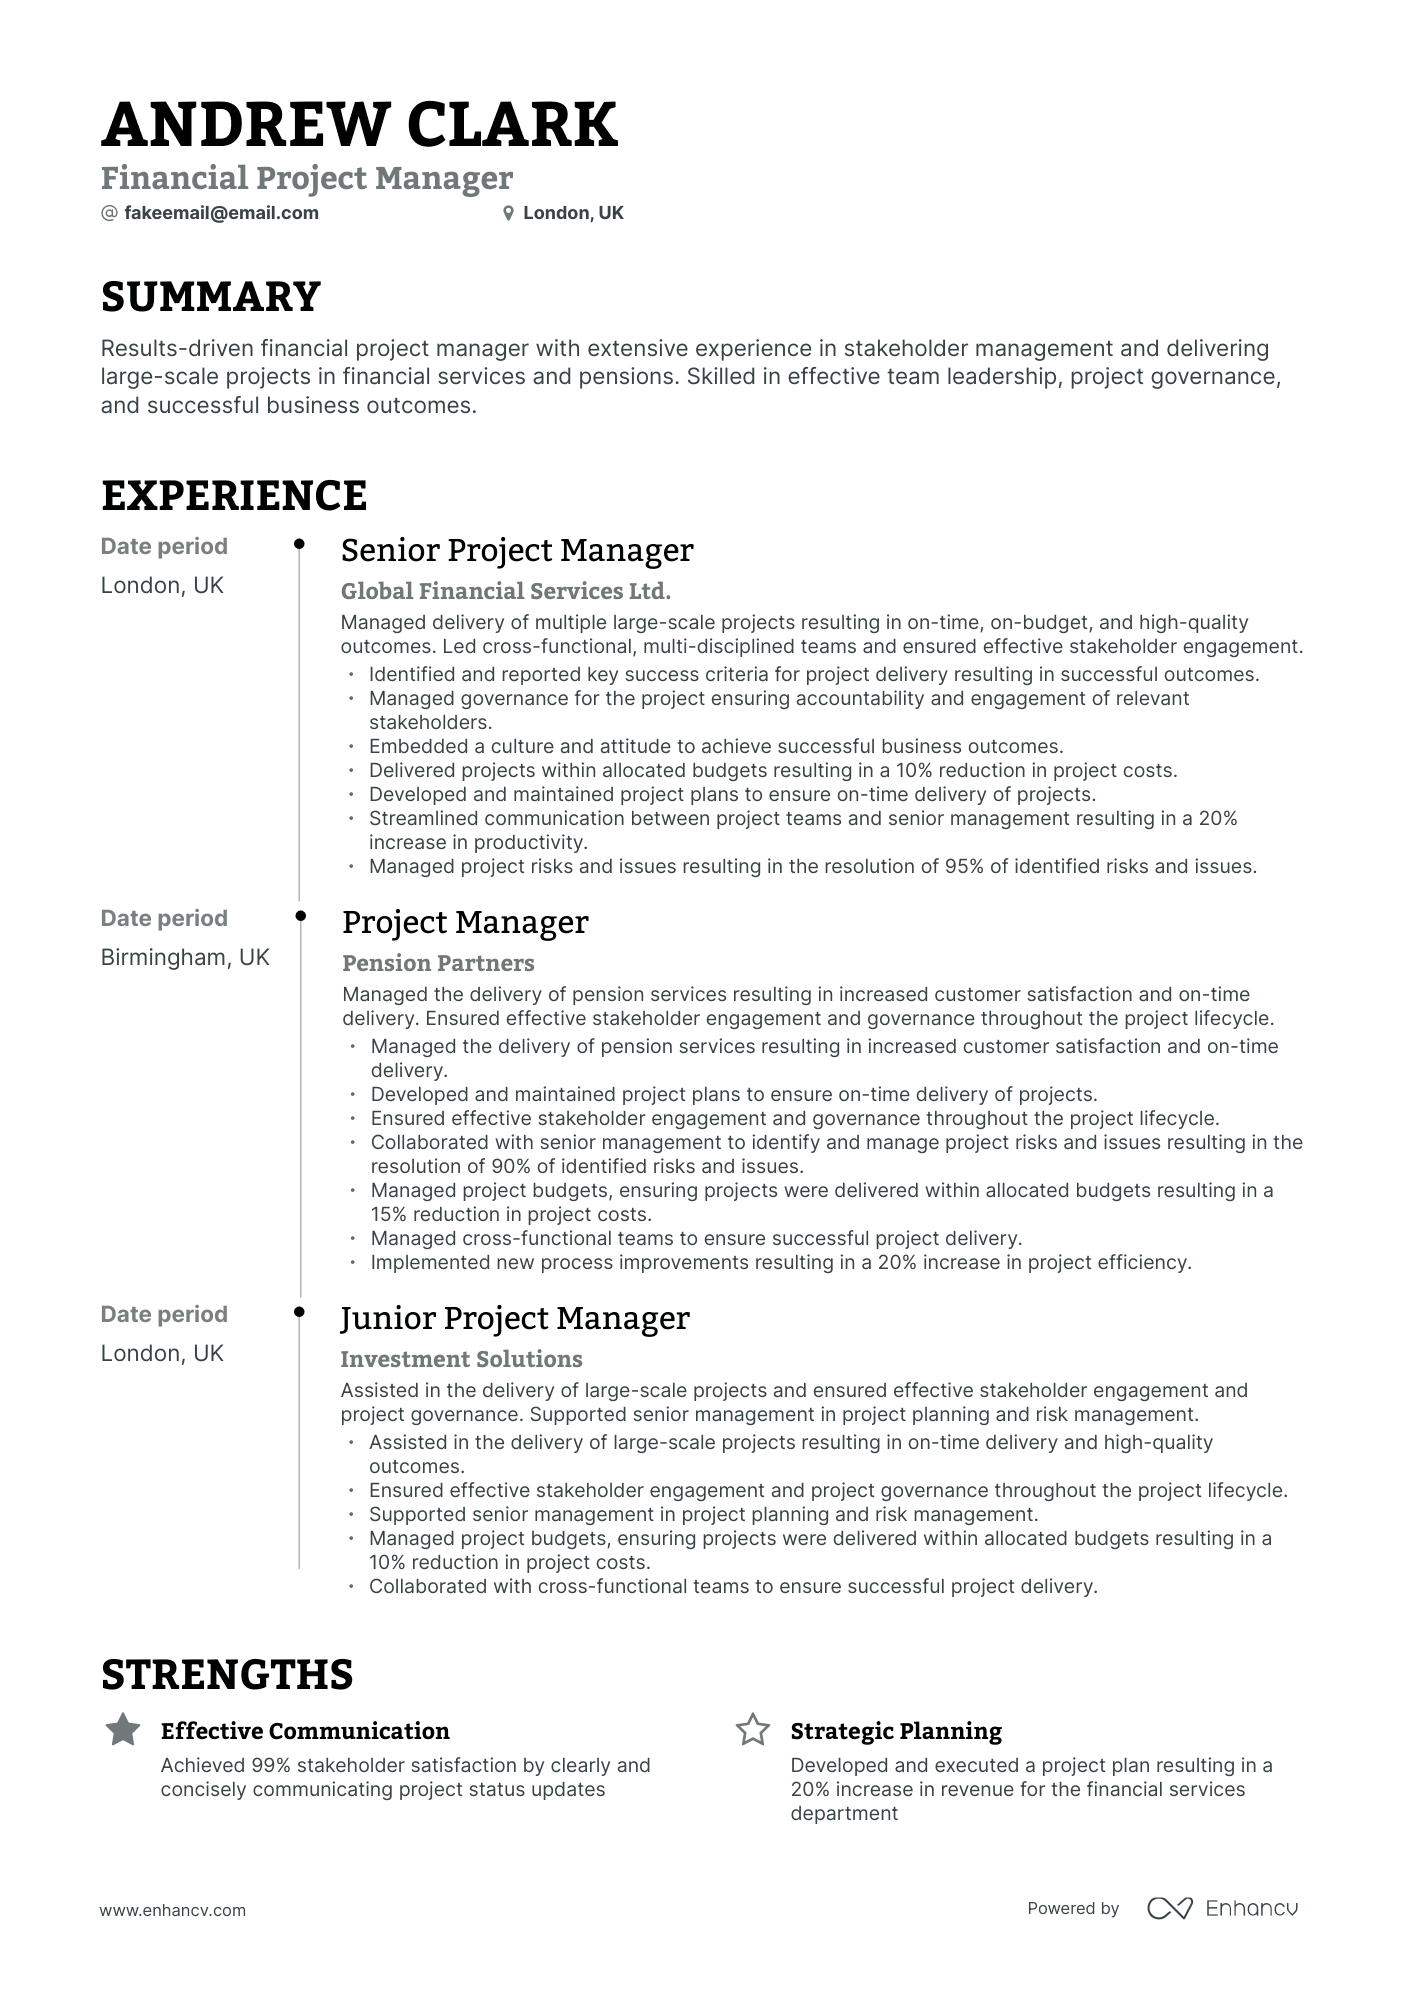 Timeline Financial Project Manager Resume Template